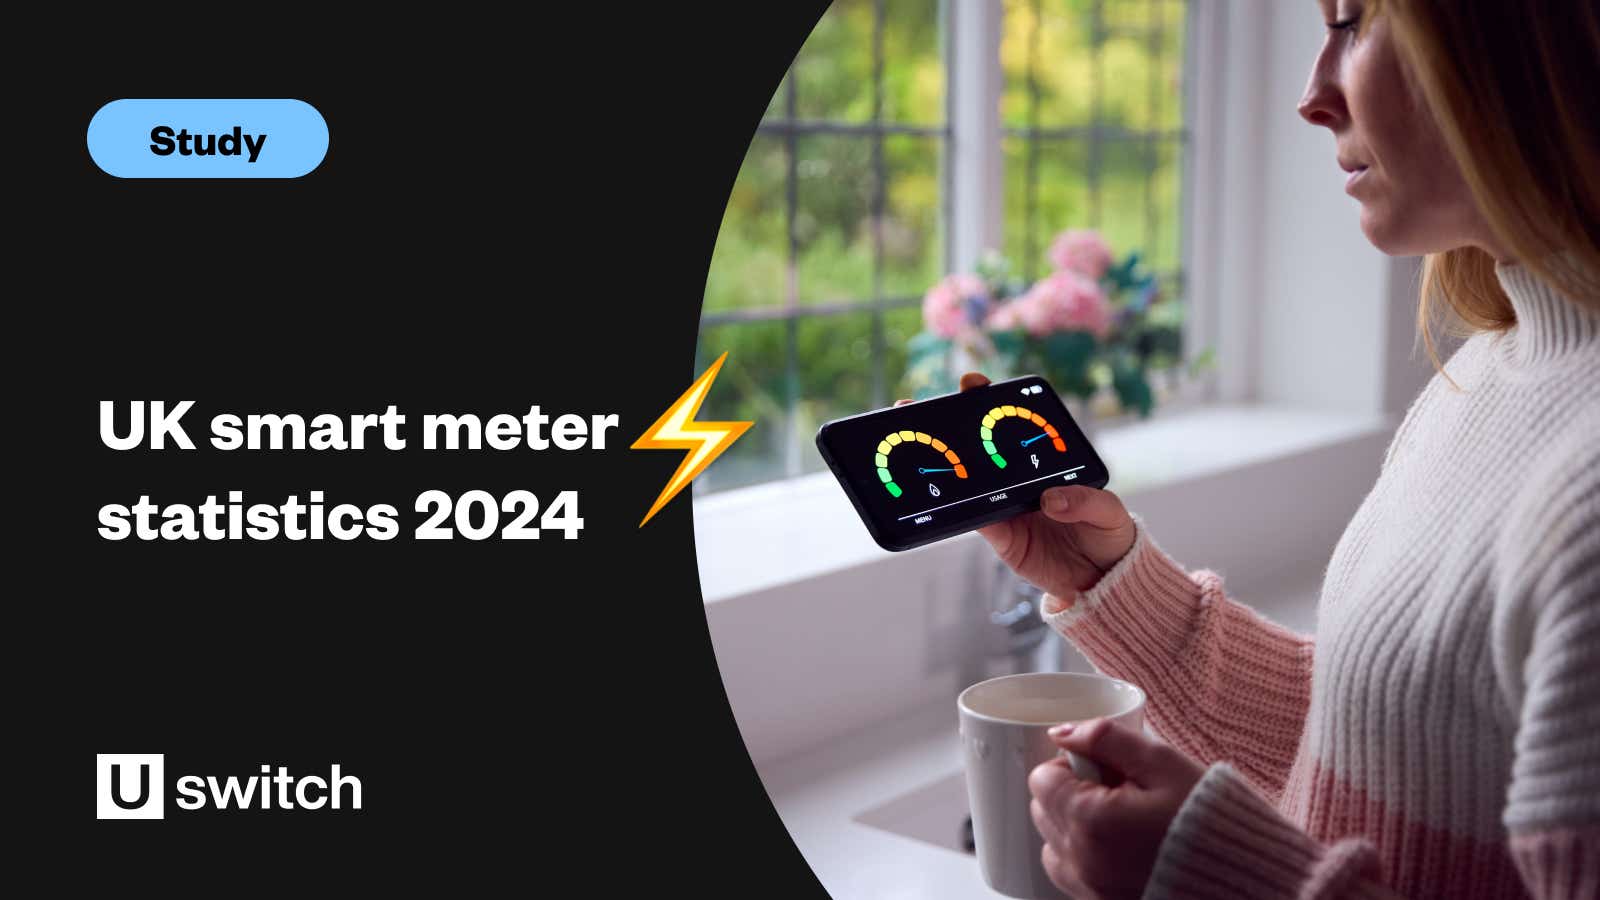 Banner graphic with the title "UK smart meter statistics 2024" and a picture of a smart meter